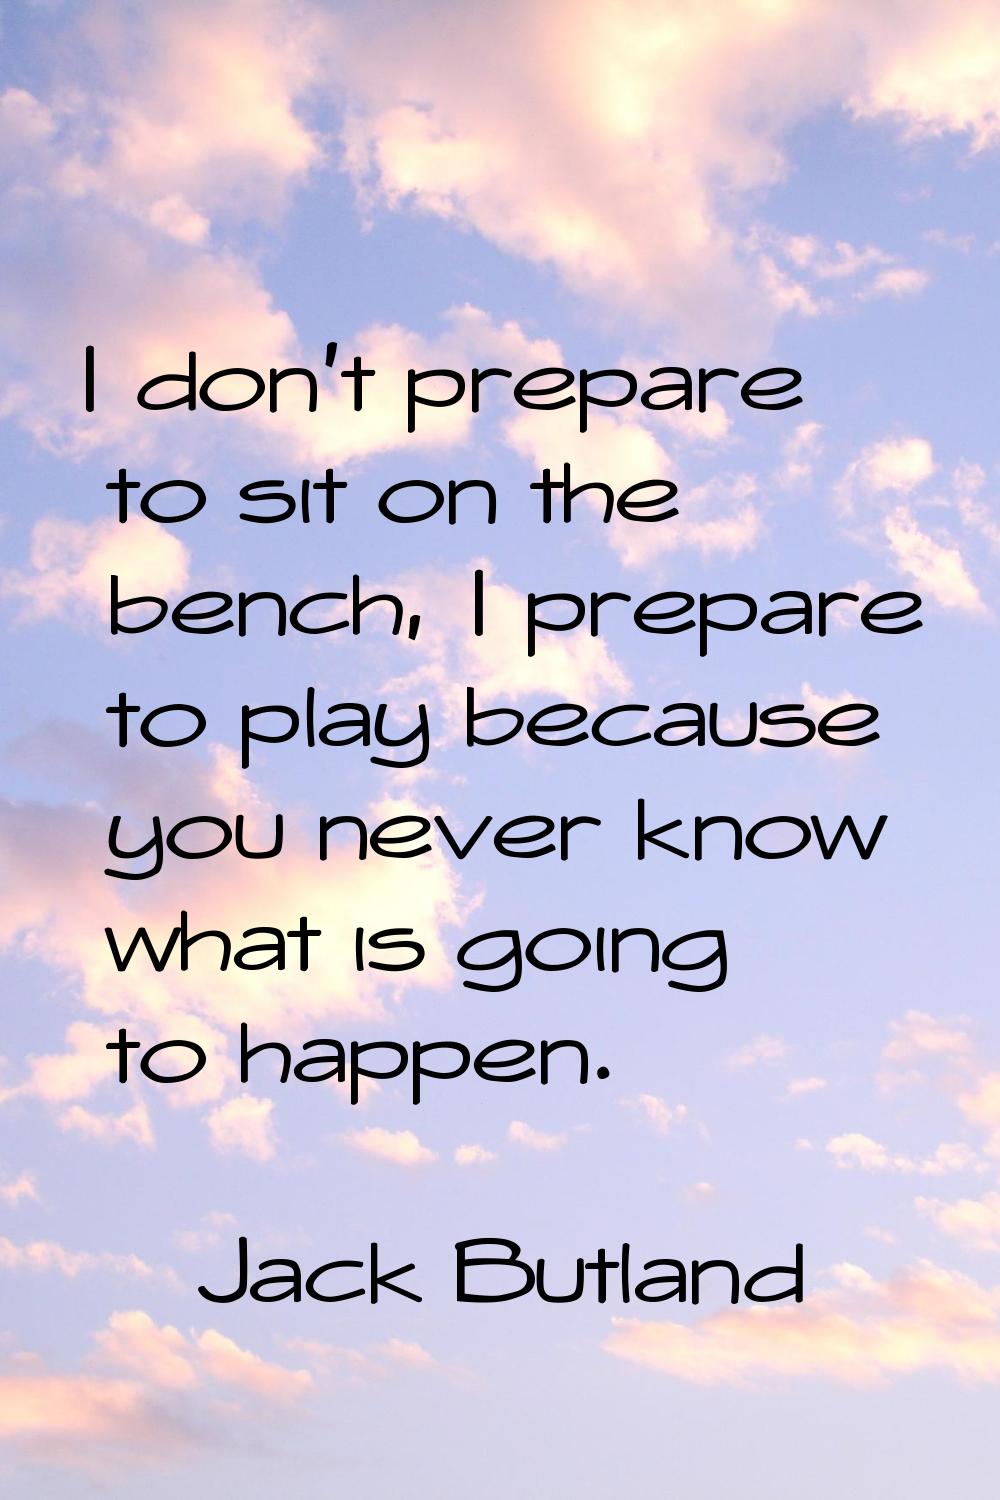 I don't prepare to sit on the bench, I prepare to play because you never know what is going to happ